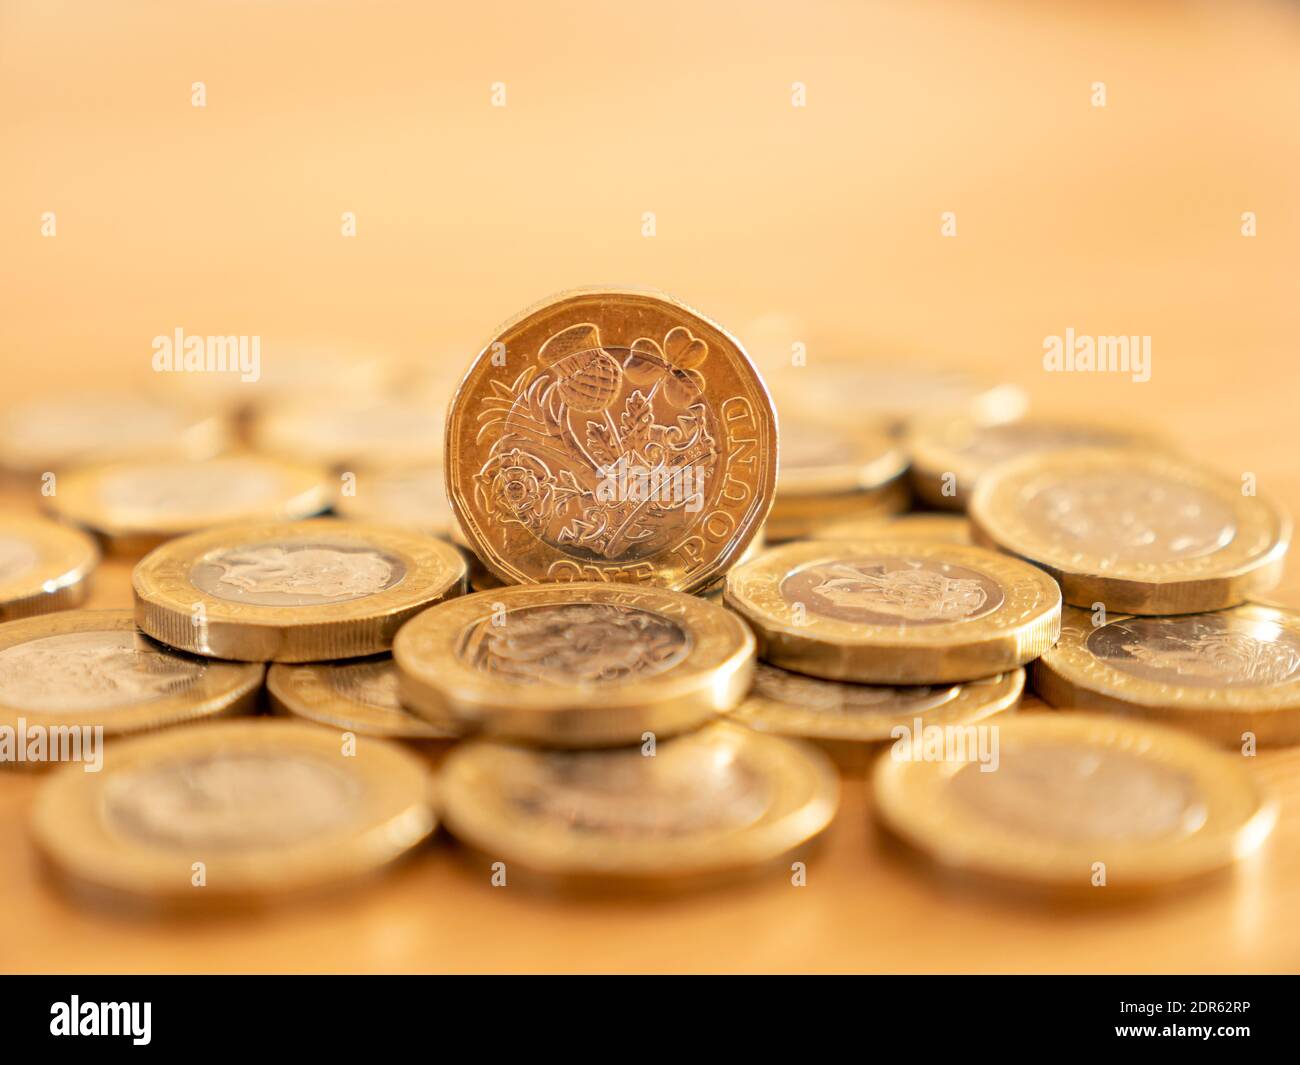 Close up of many GBP one pound coins on the table surface, UK Stock Photo